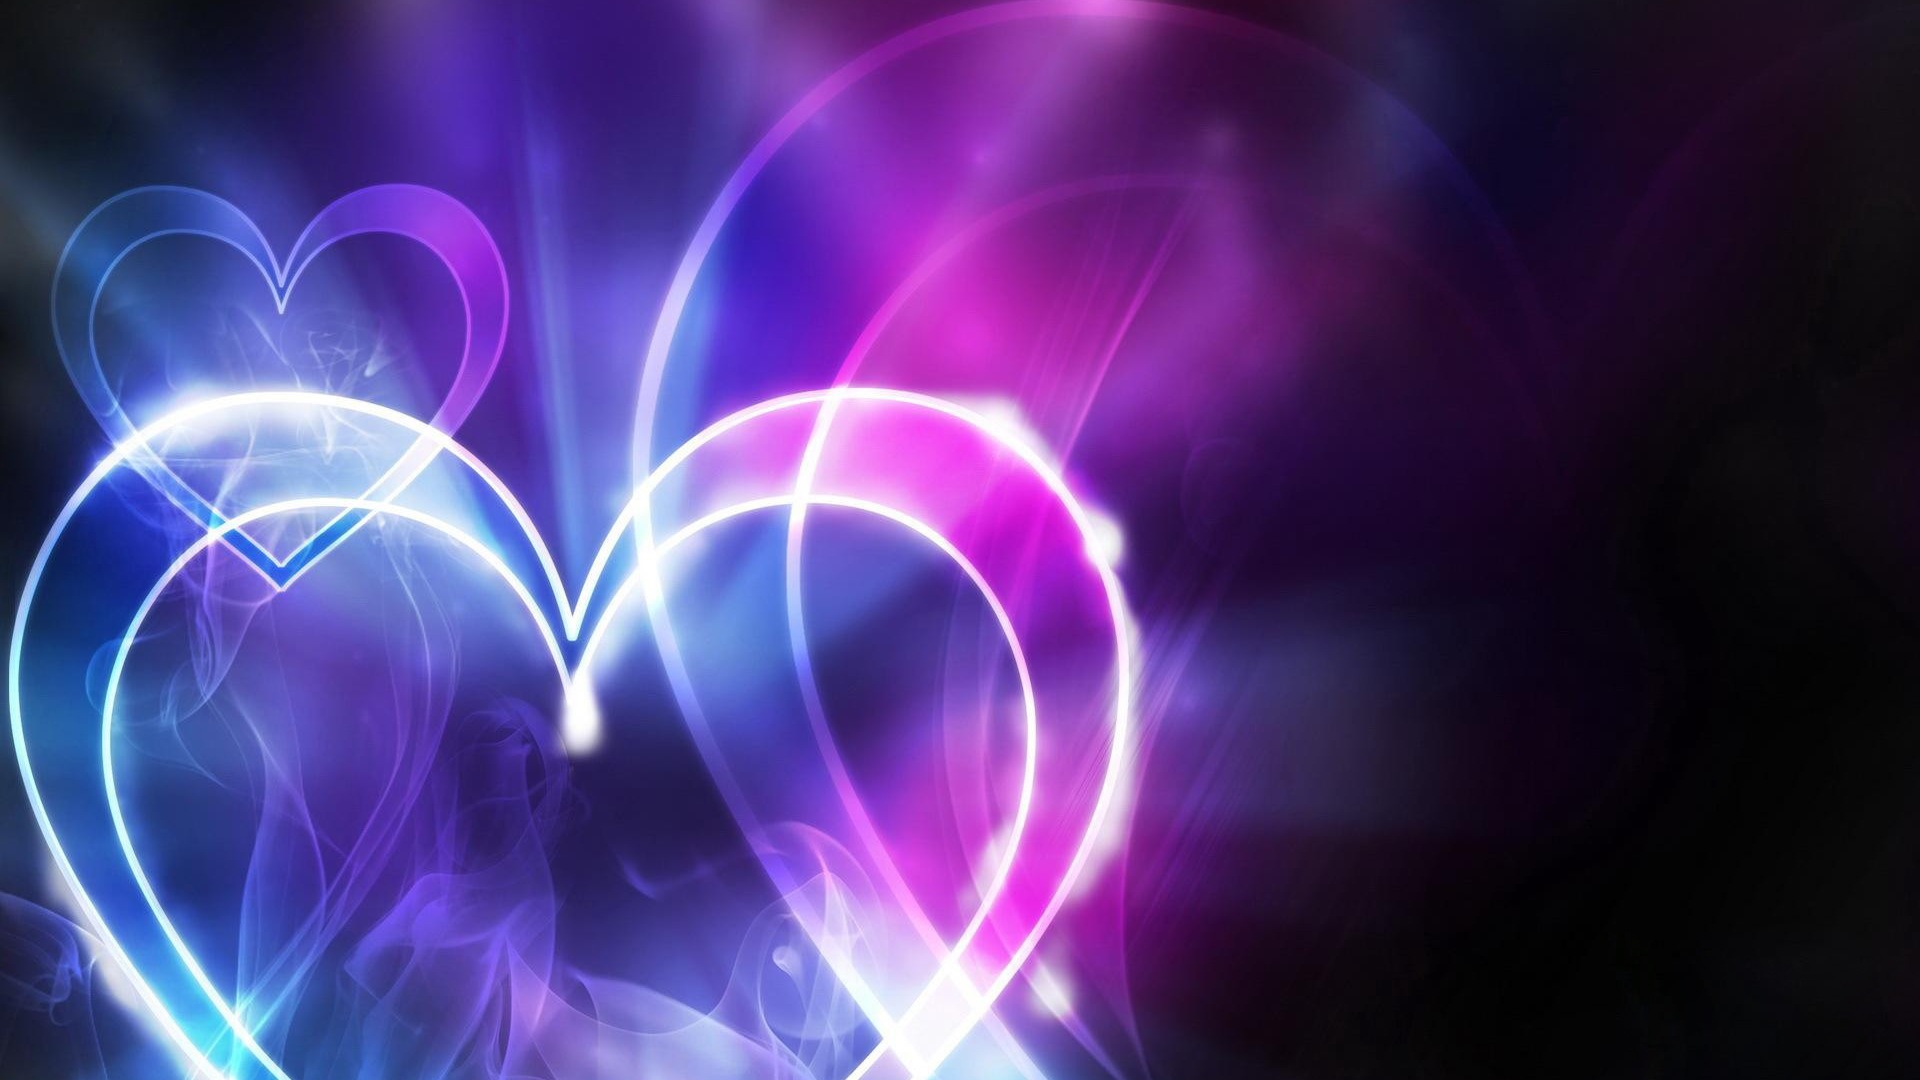 The theme of love, creative heart-shaped HD wallpapers #8 - 1920x1080